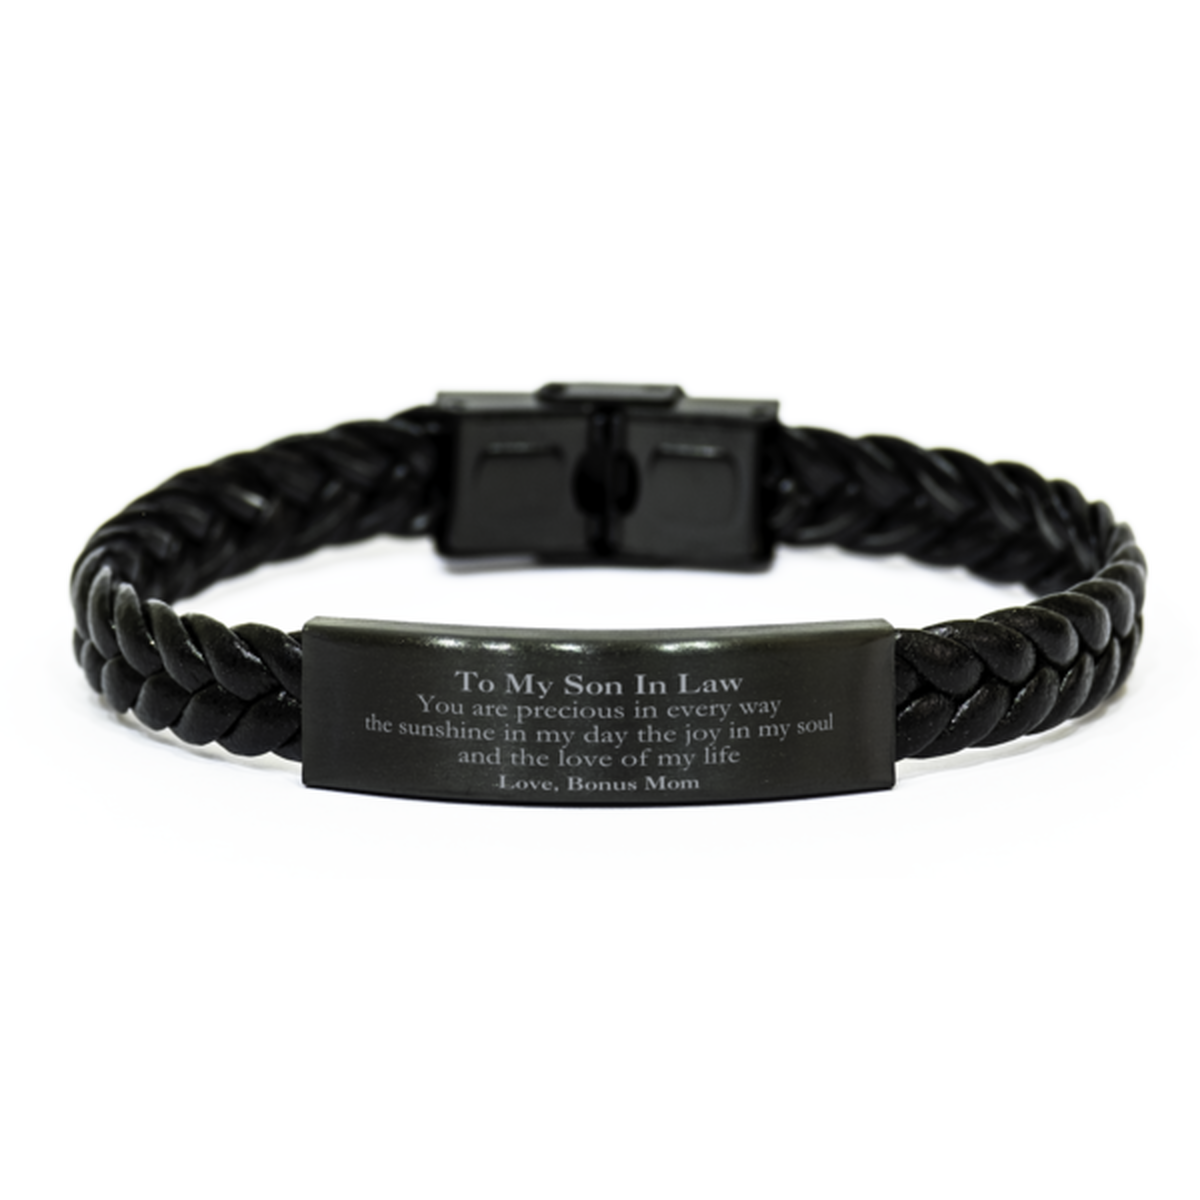 Graduation Gifts for Son In Law Braided Leather Bracelet Present from Bonus Mom, Christmas Son In Law Birthday Gifts Son In Law You are precious in every way the sunshine in my day. Love, Bonus Mom